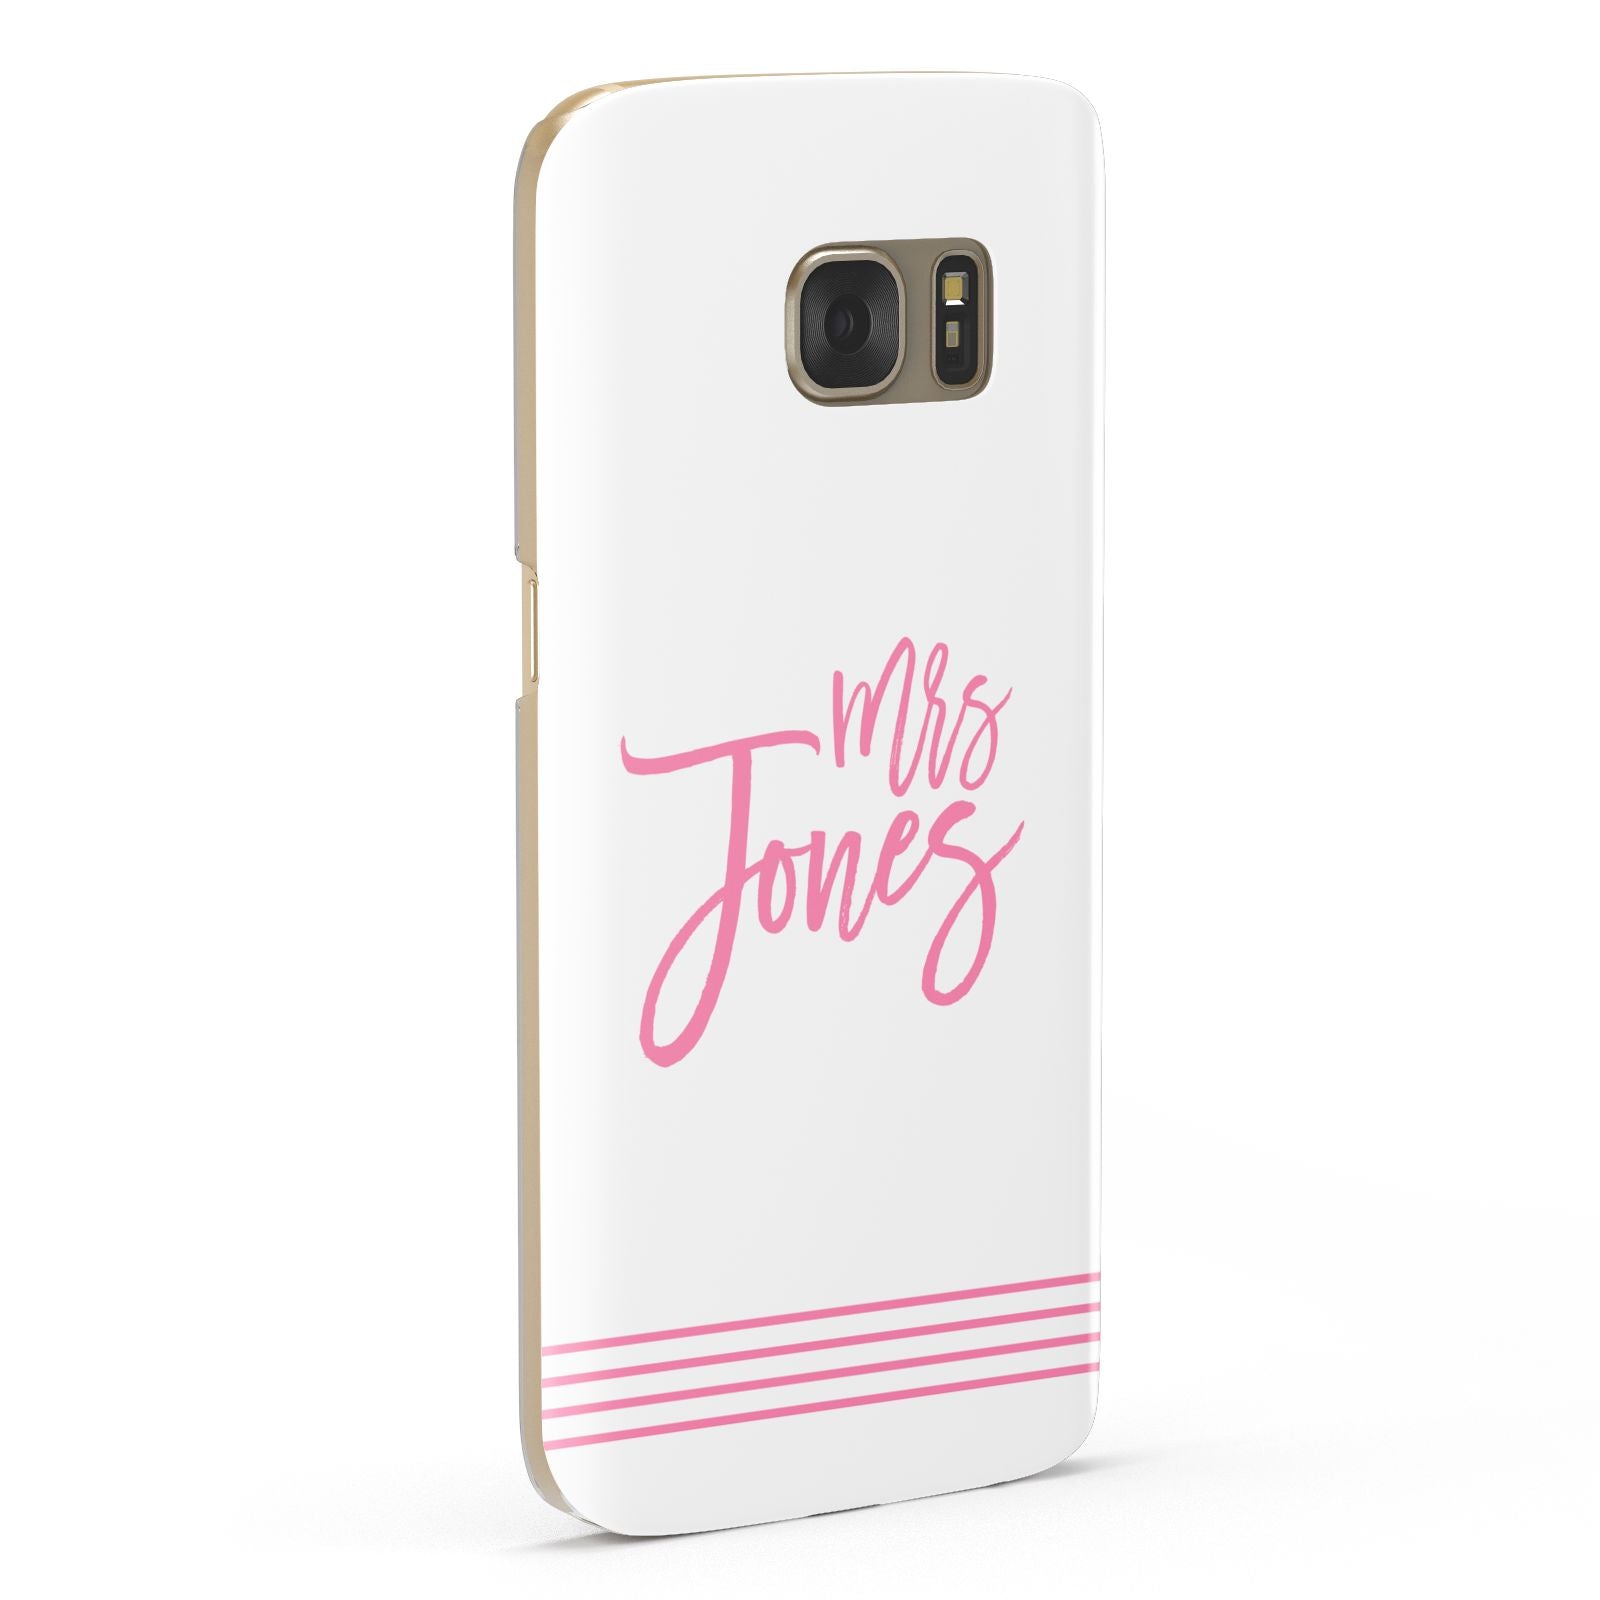 Personalised Hers Samsung Galaxy Case Fourty Five Degrees